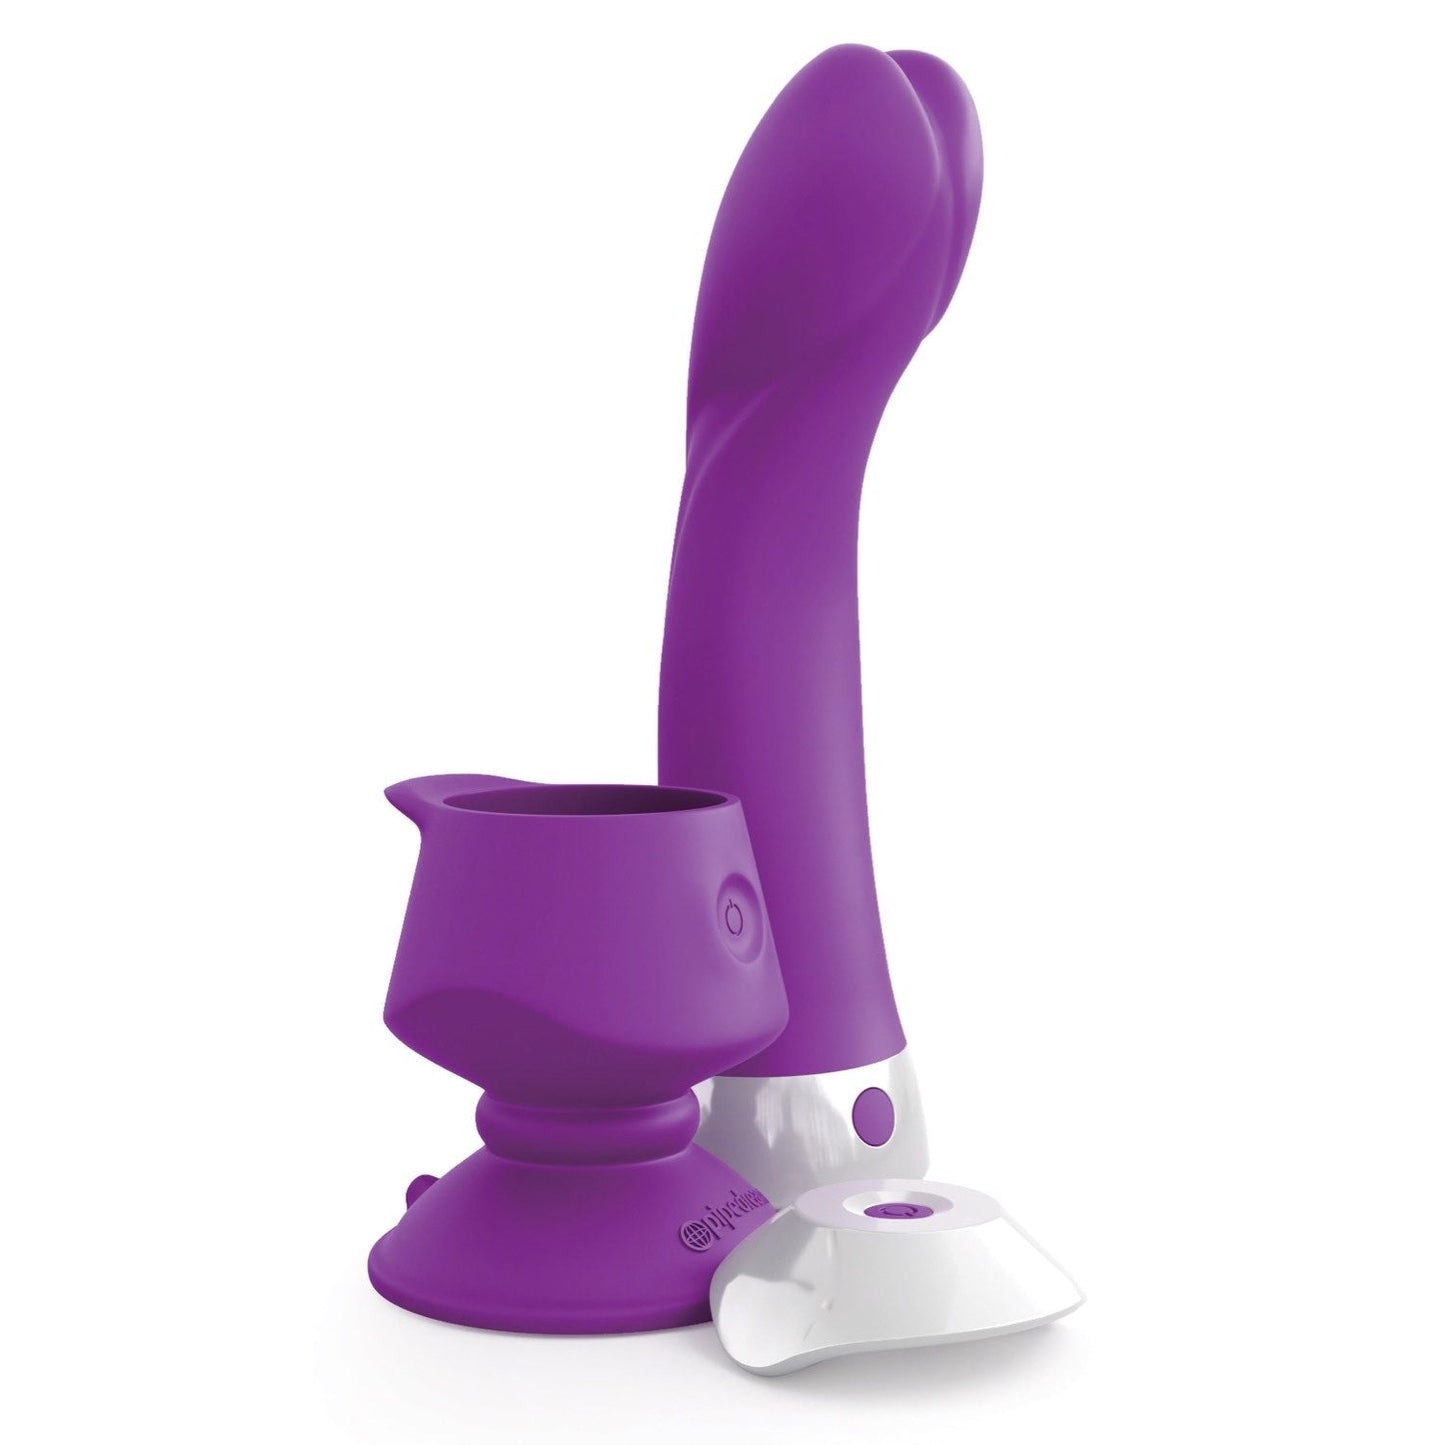 Wall Banger G - Purple USB Rechargeable Vibrator with Wireless Remote